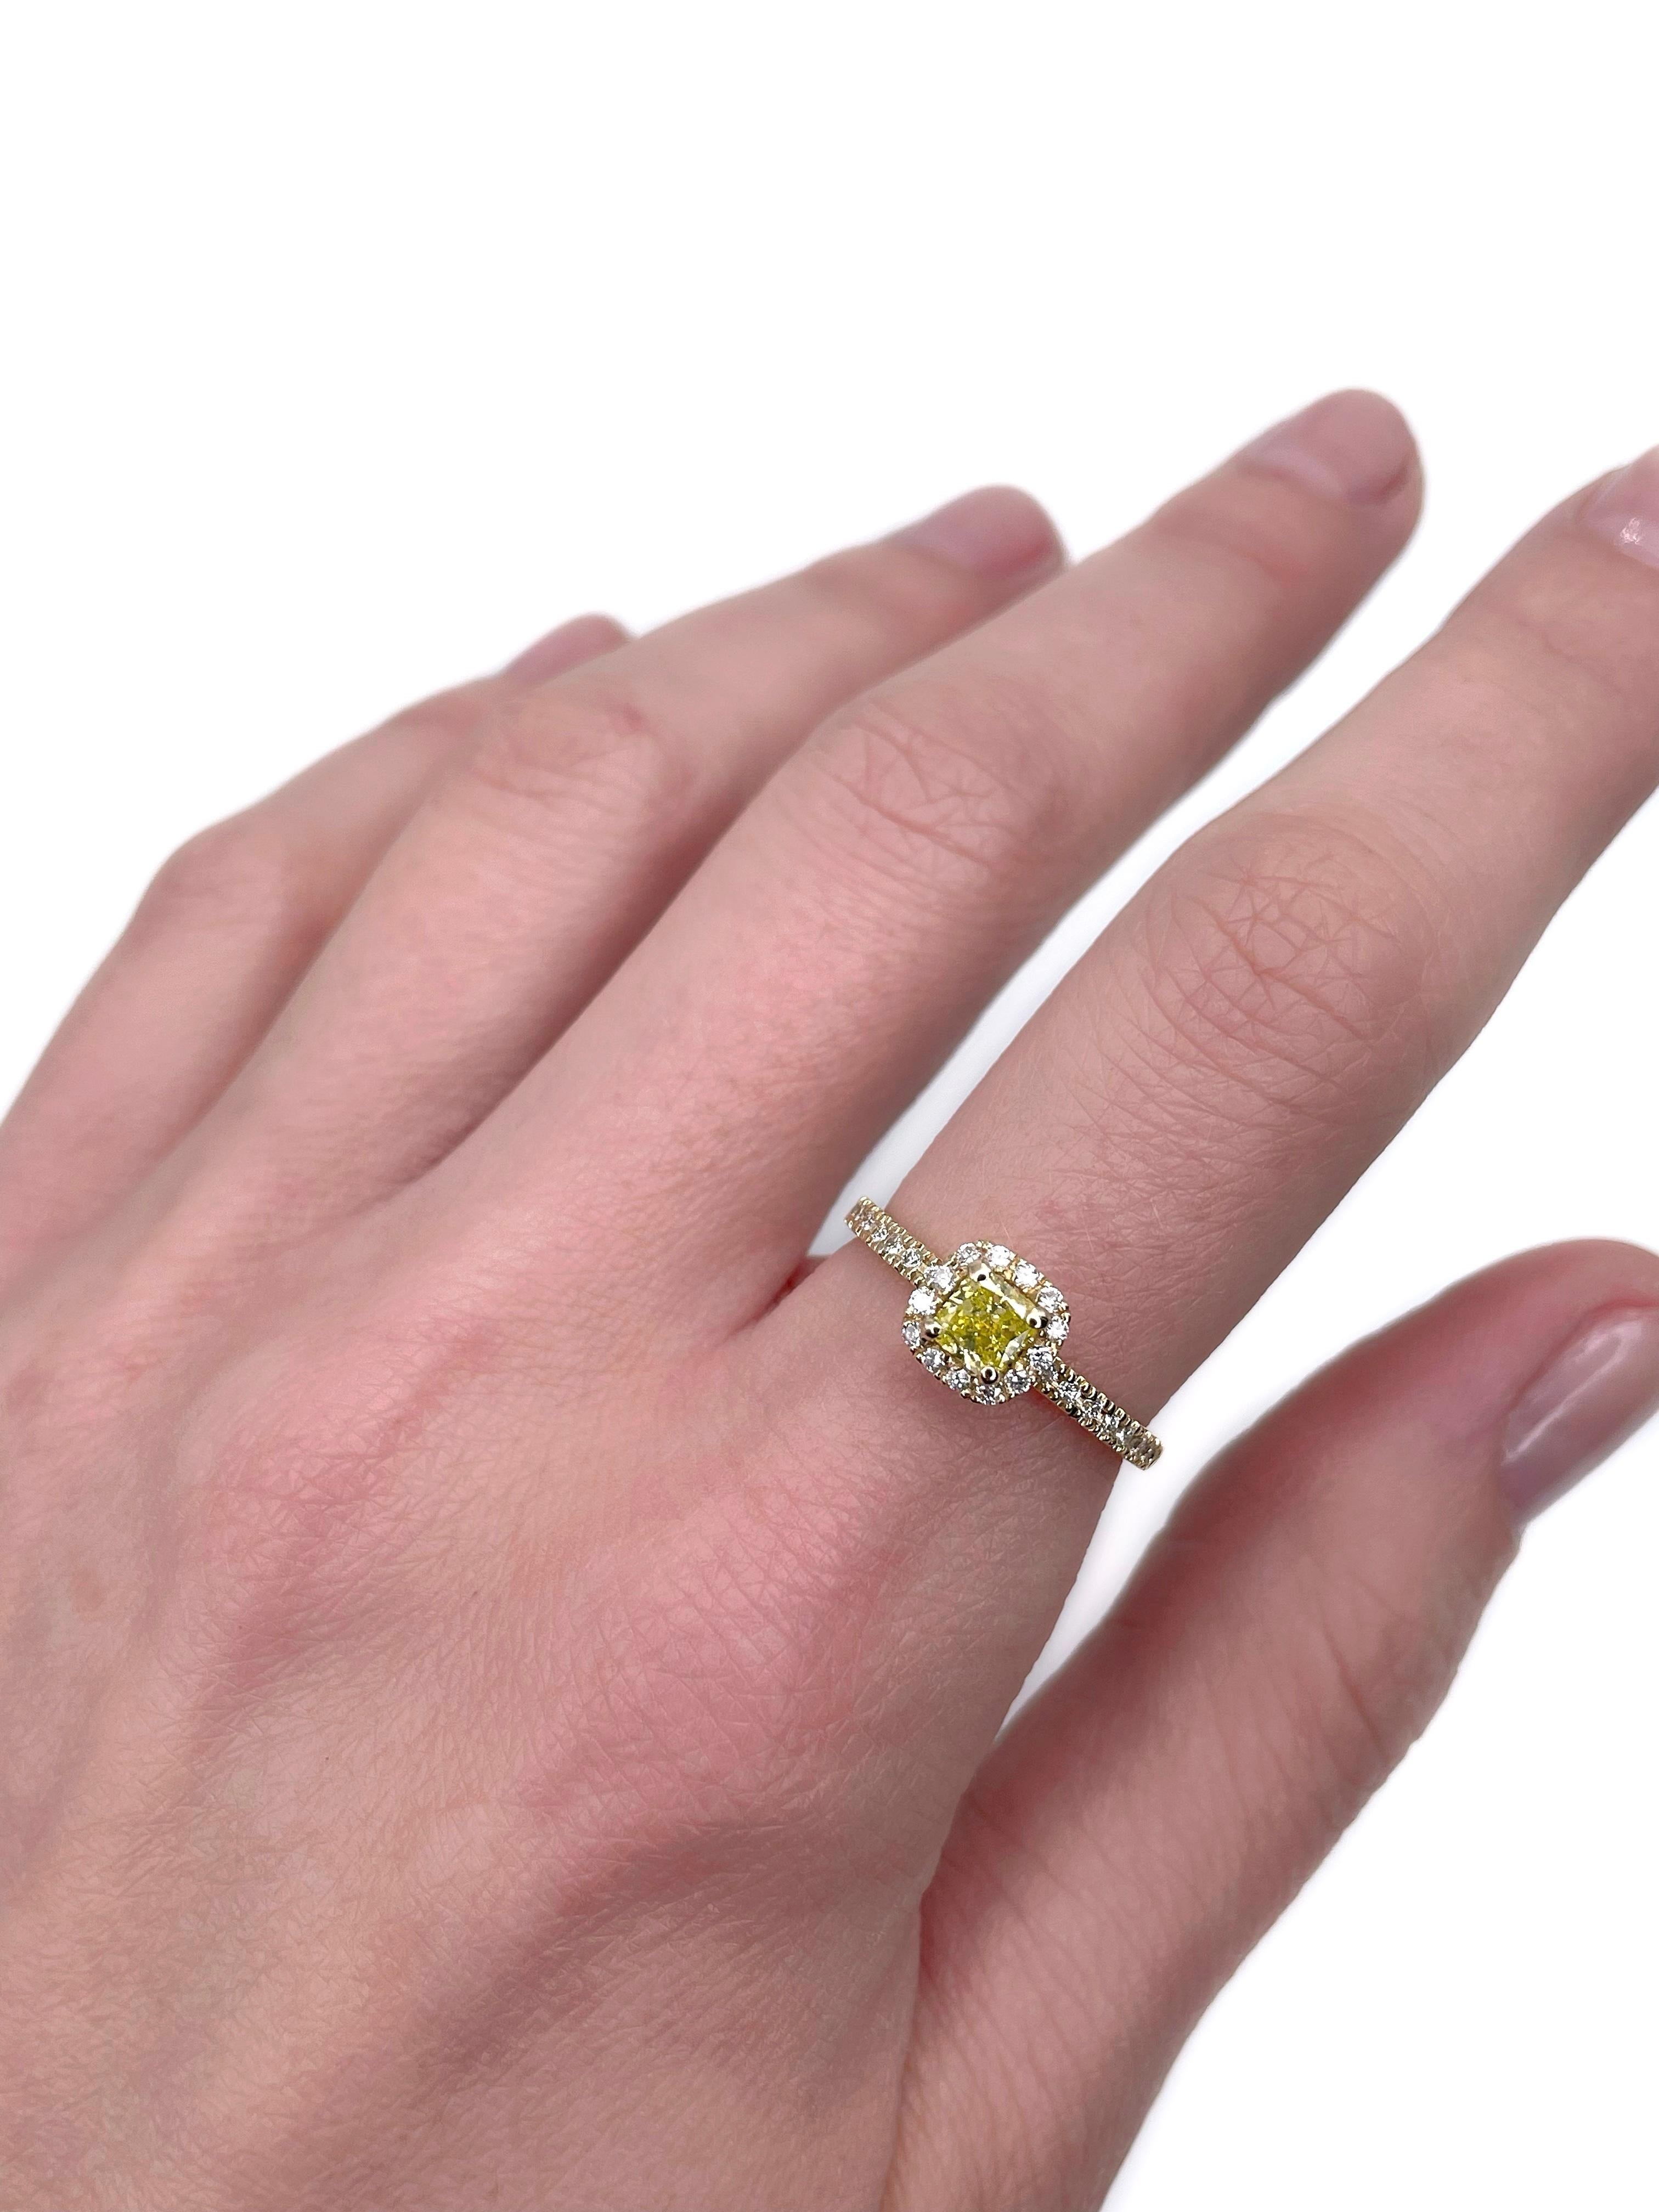 This is a modern engagement ring crafted in 18K yellow gold. The piece is certified by Gem Report Antwerp (can be found in photo gallery).

The ring features 0.40ct cushion brilliant cut natural fancy yellow diamond in the centre. It is accompanied